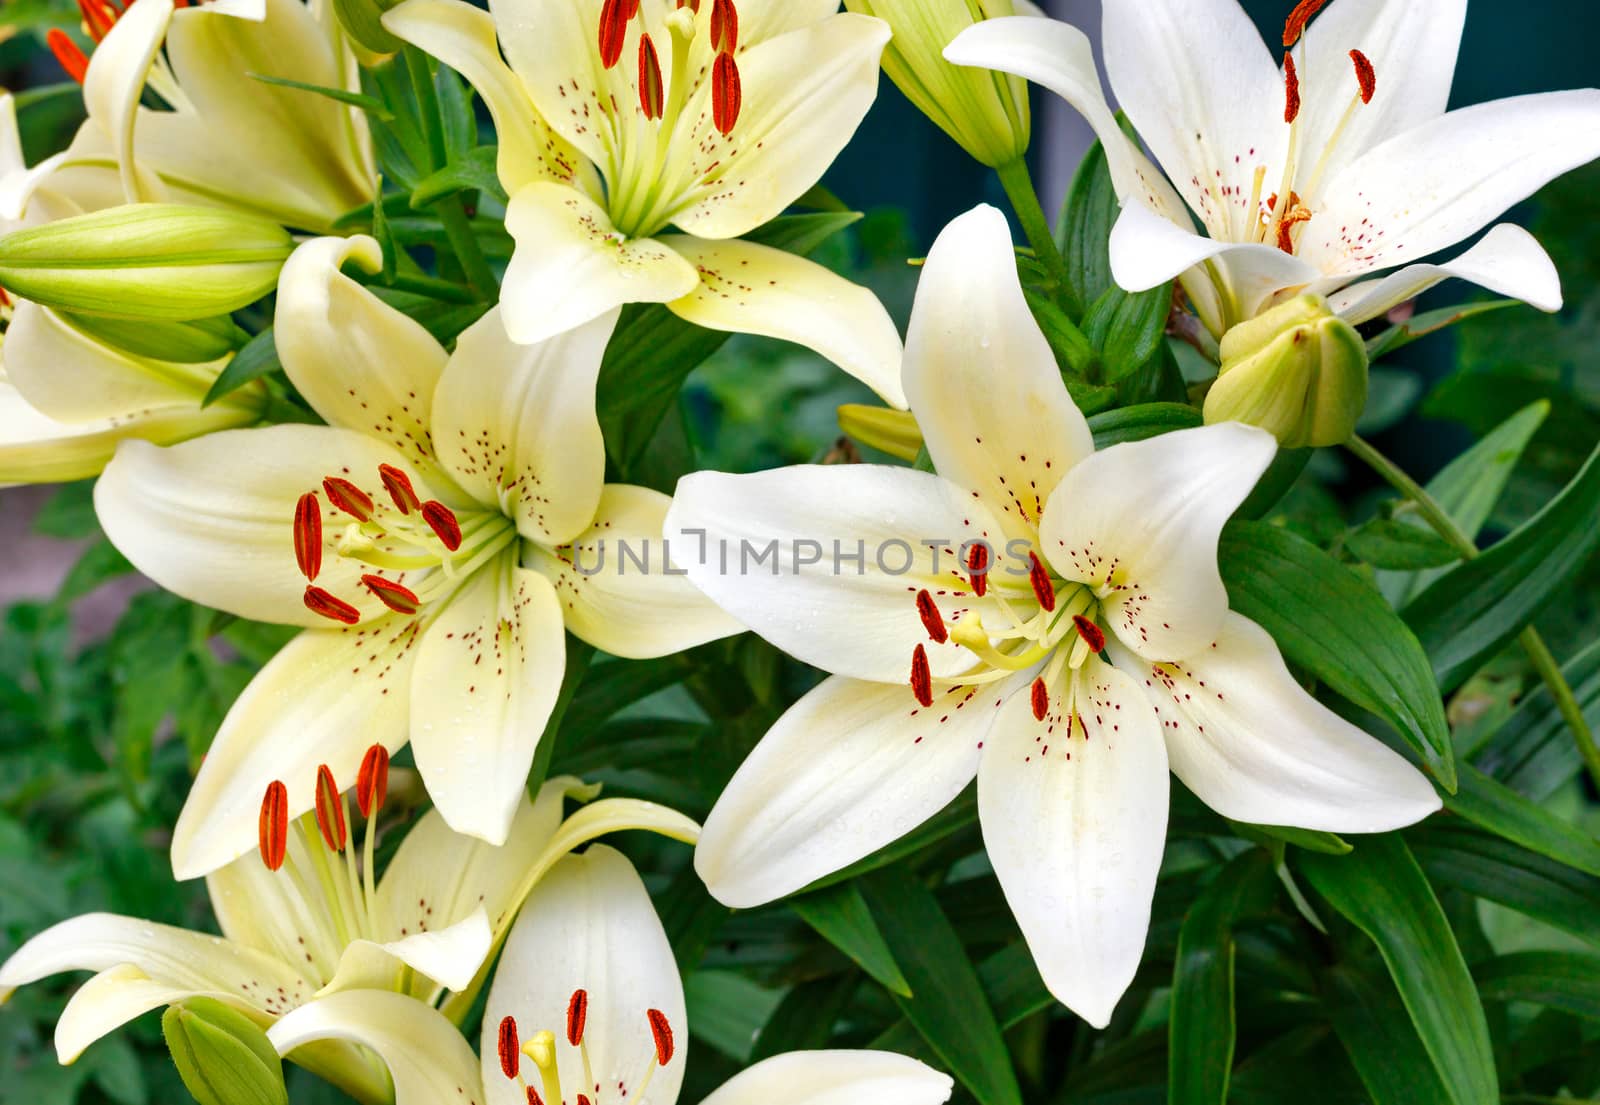 Blooming bush of large beautiful flowers of a white lily with bright orange stamens on a dark green background of blurred leaves, close-up, selective focus.